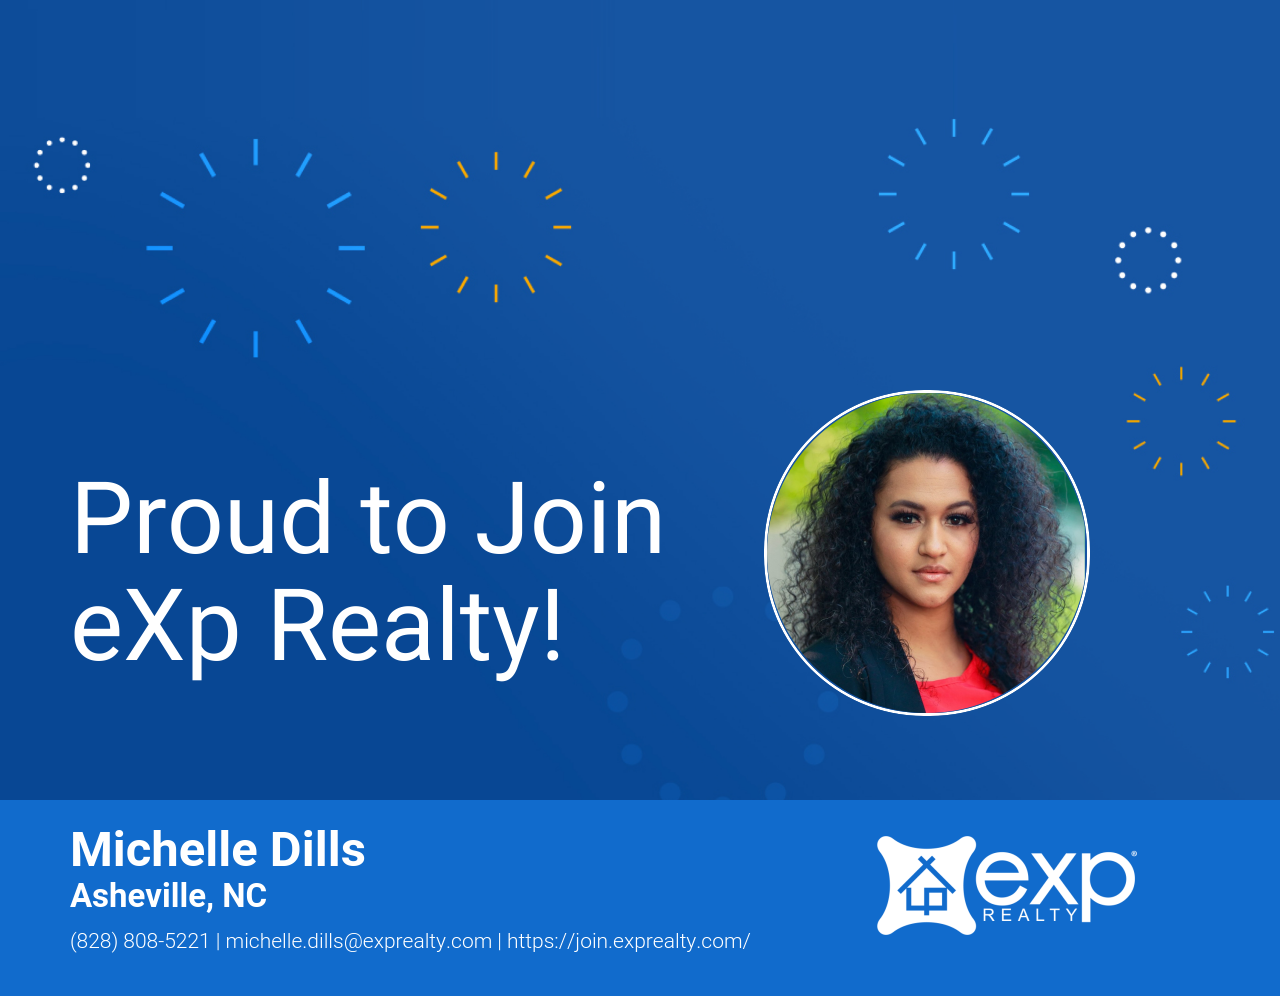 Michelle Dills Joined eXp Realty!